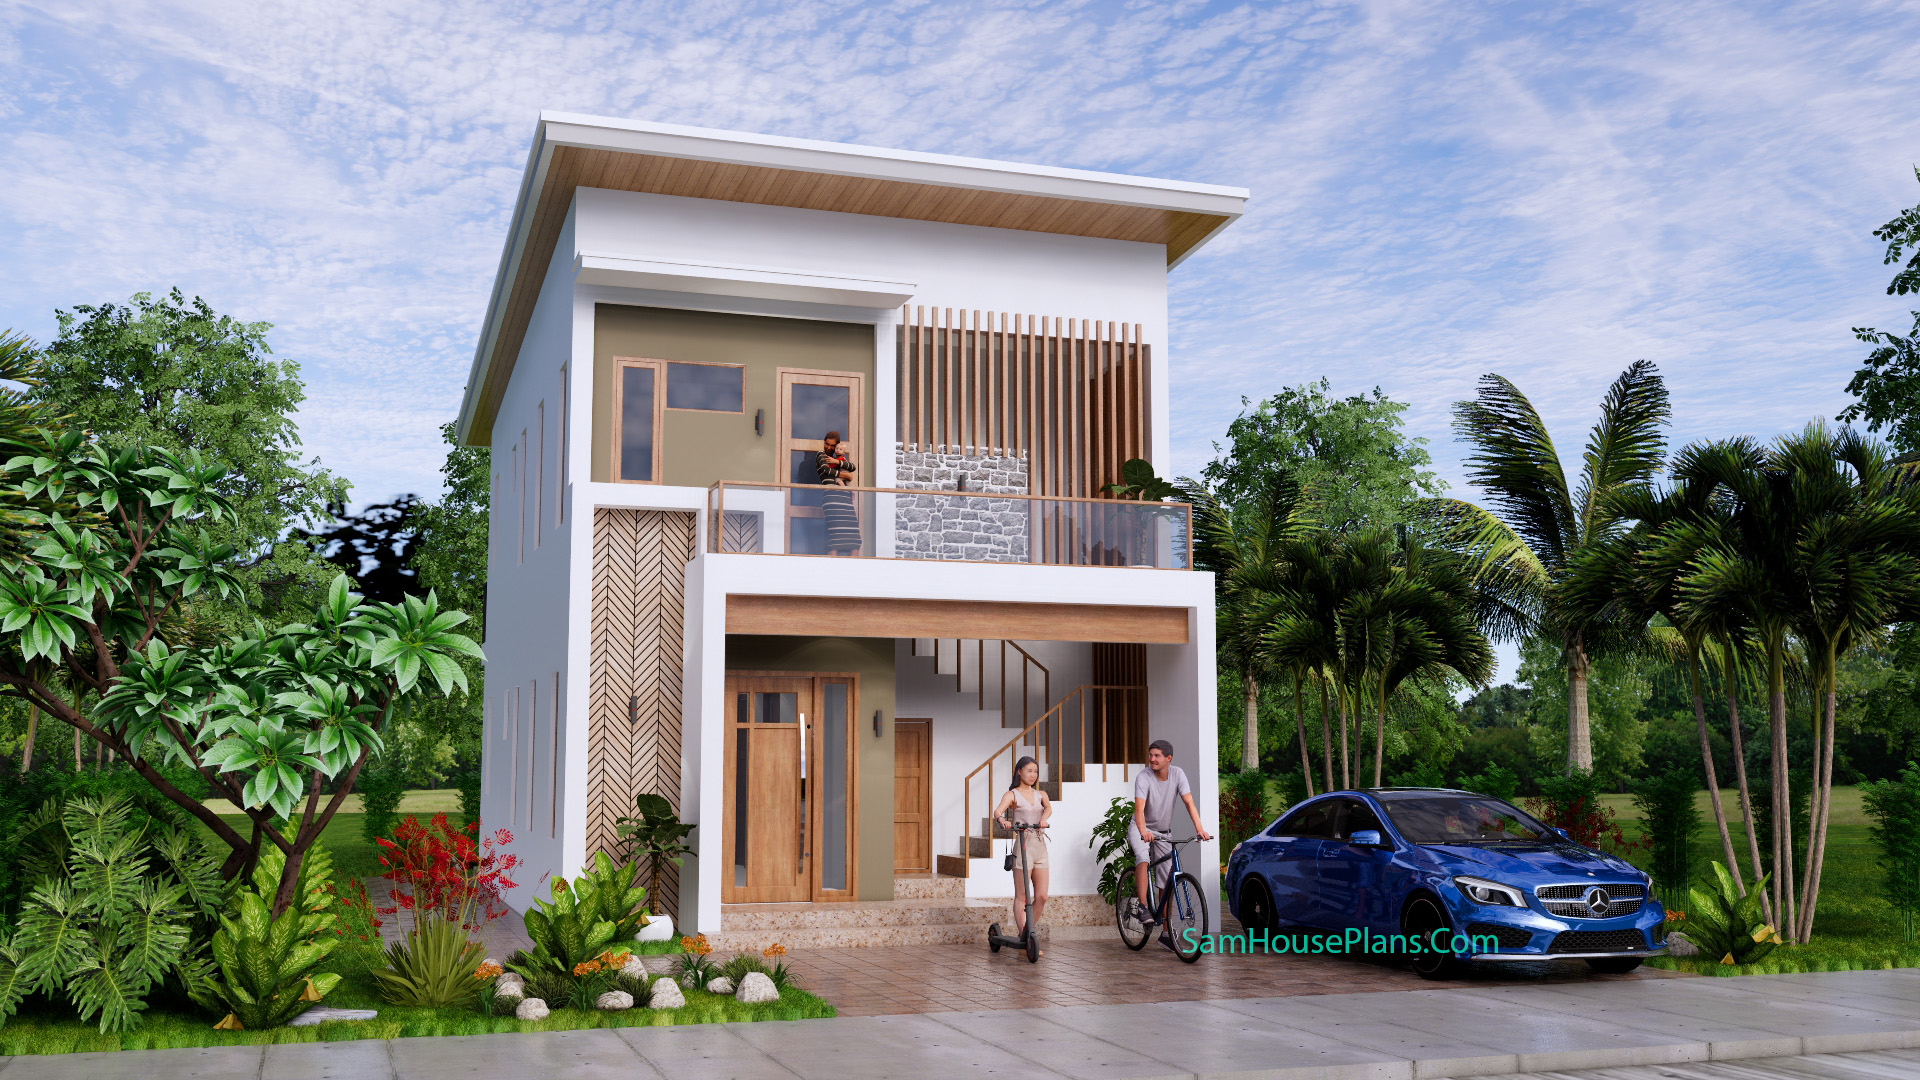 20x30 Small House Plan 6x9 M With 2